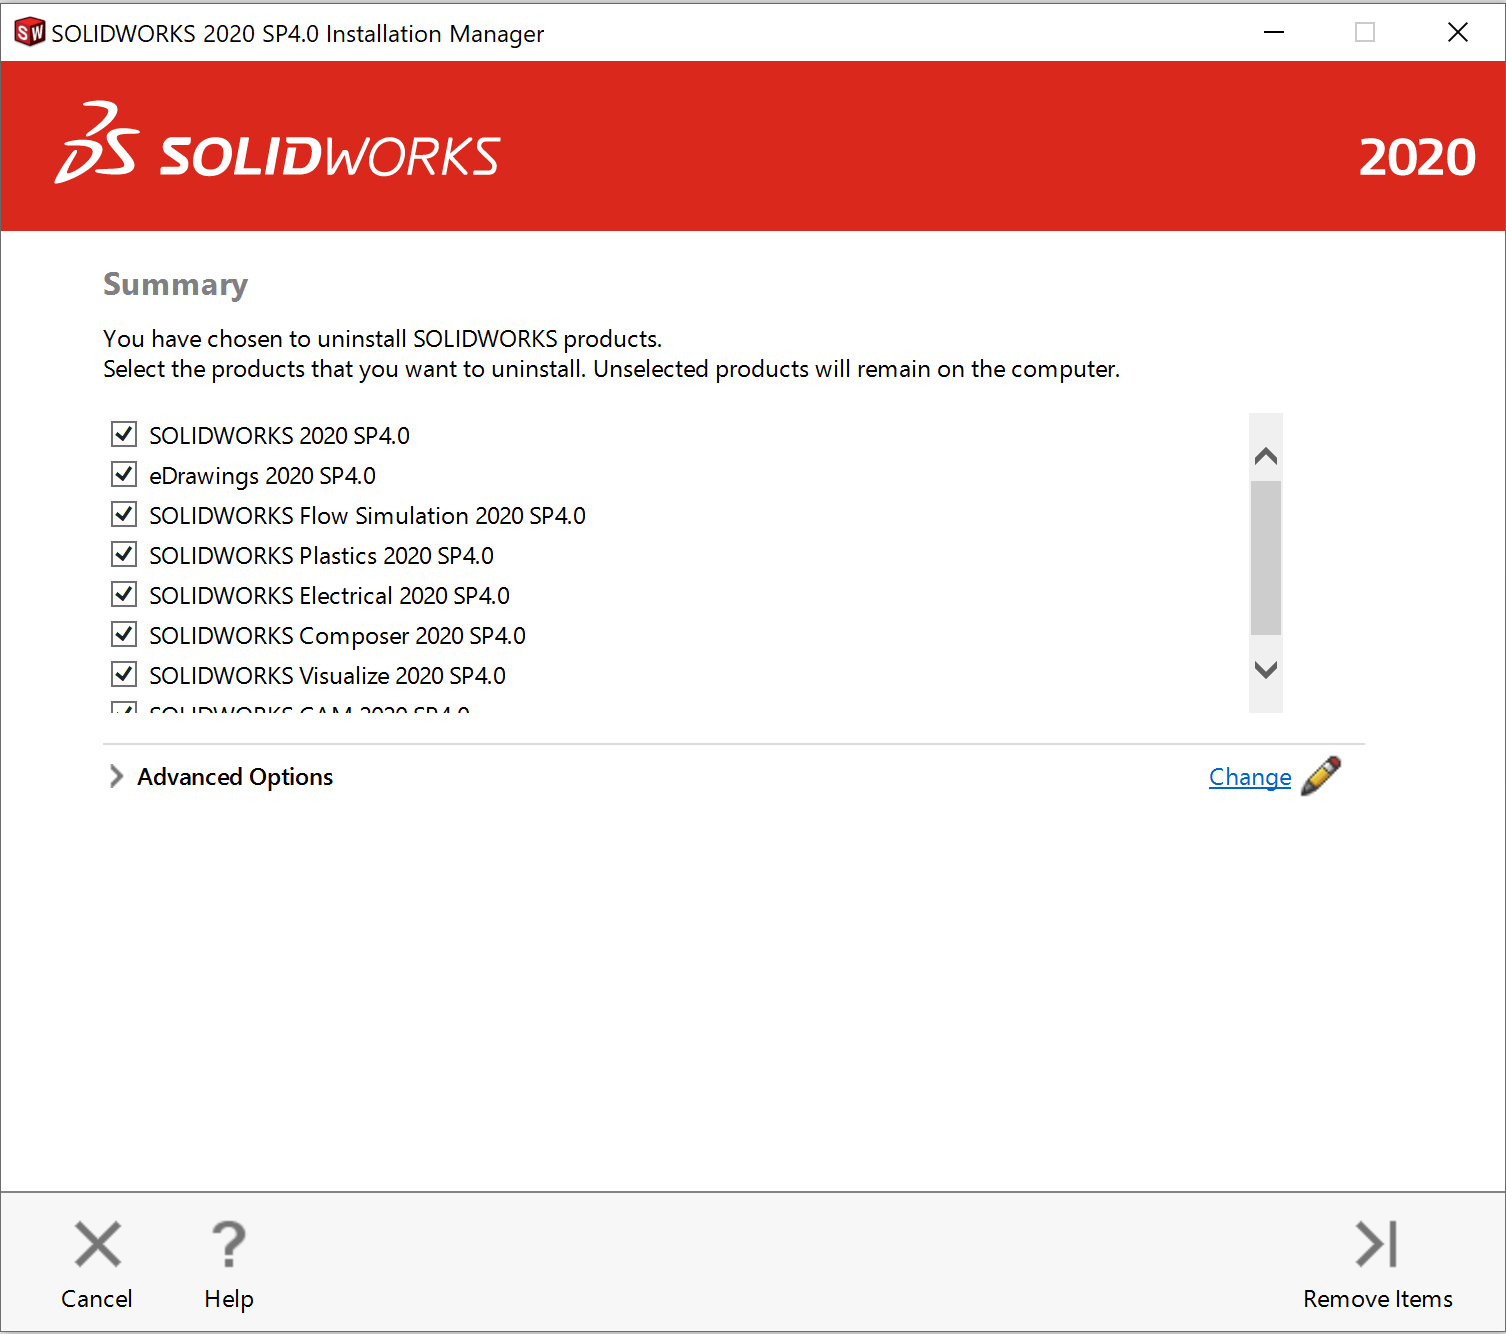 SOLIDWORKS Installation Manager will open and give several program options with check boxes next to them. All the checkboxes are checked off. On the bottom of this, there will be a cancel, help, and remove items buttons. 